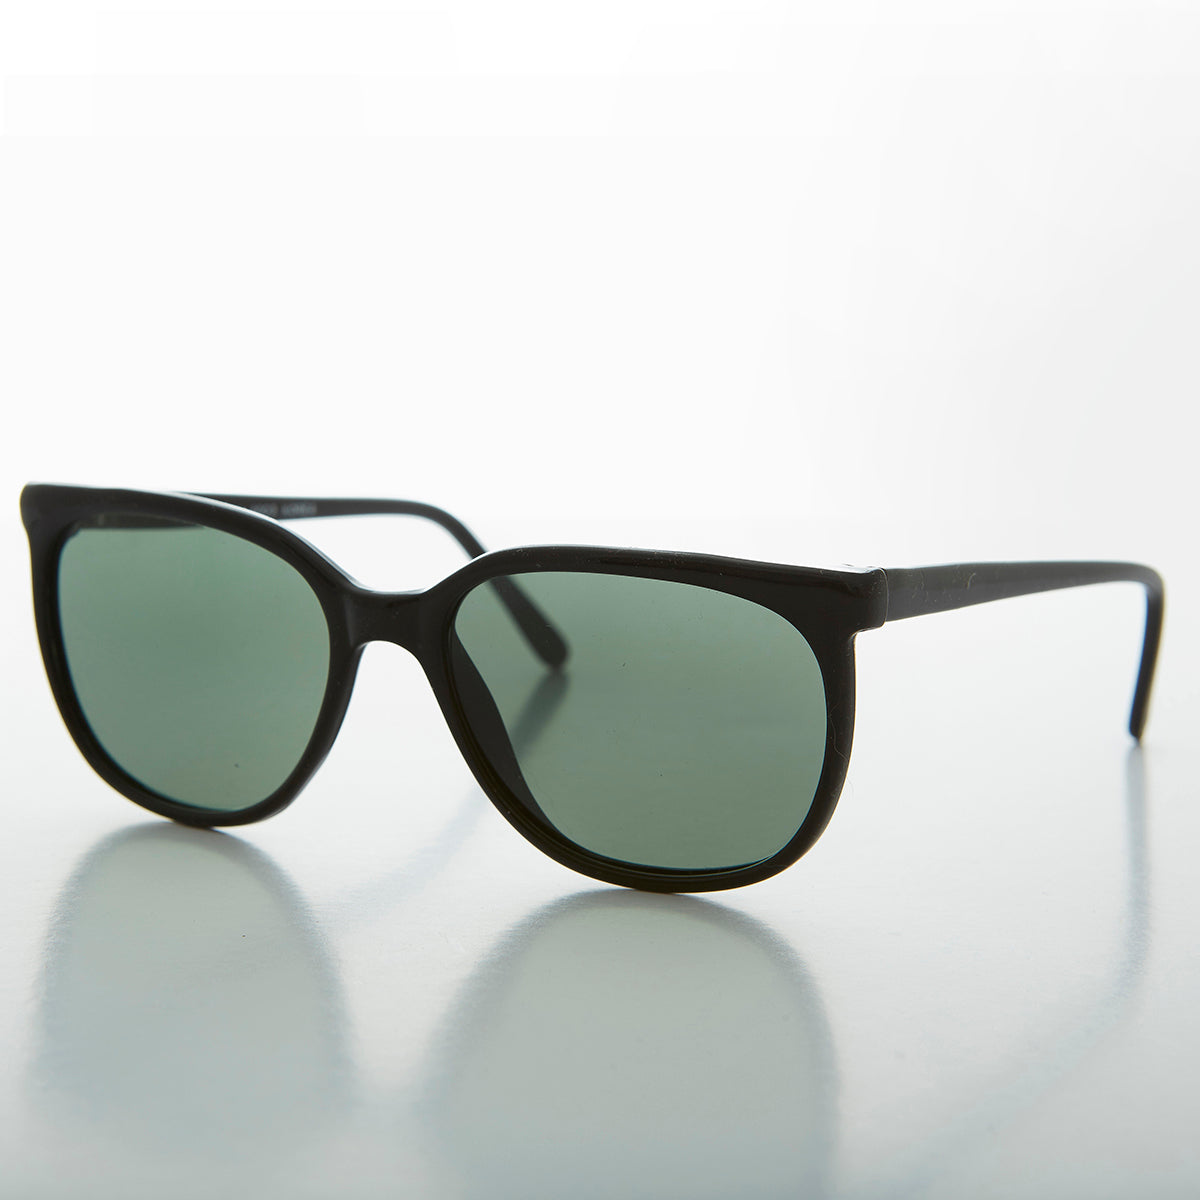 Rounded Square Classic Retro Sunglass with Glass Lens